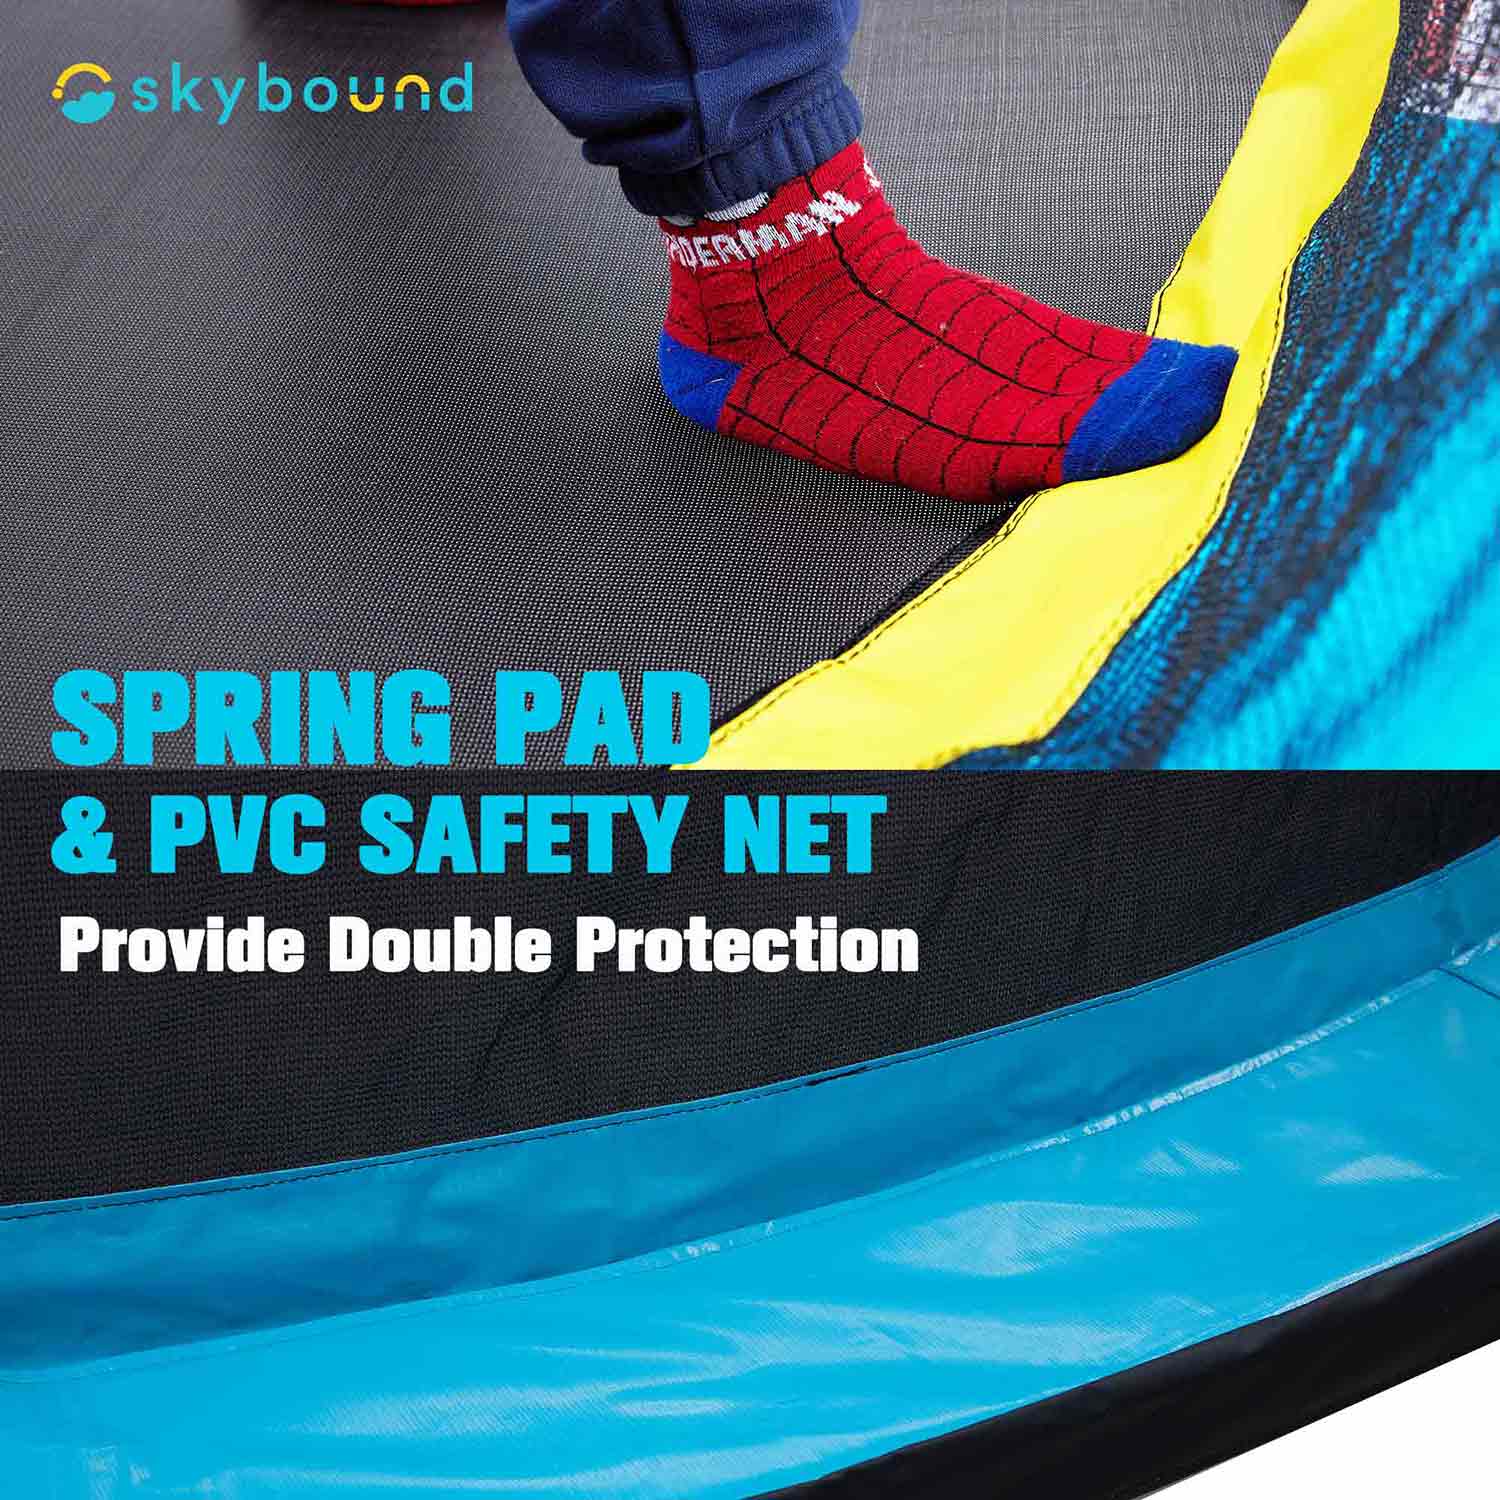 SkyBound-kids-Trampoline-8ft-Spring-PAD-and-PVC-Safety-Net-Provide-Double-Protection